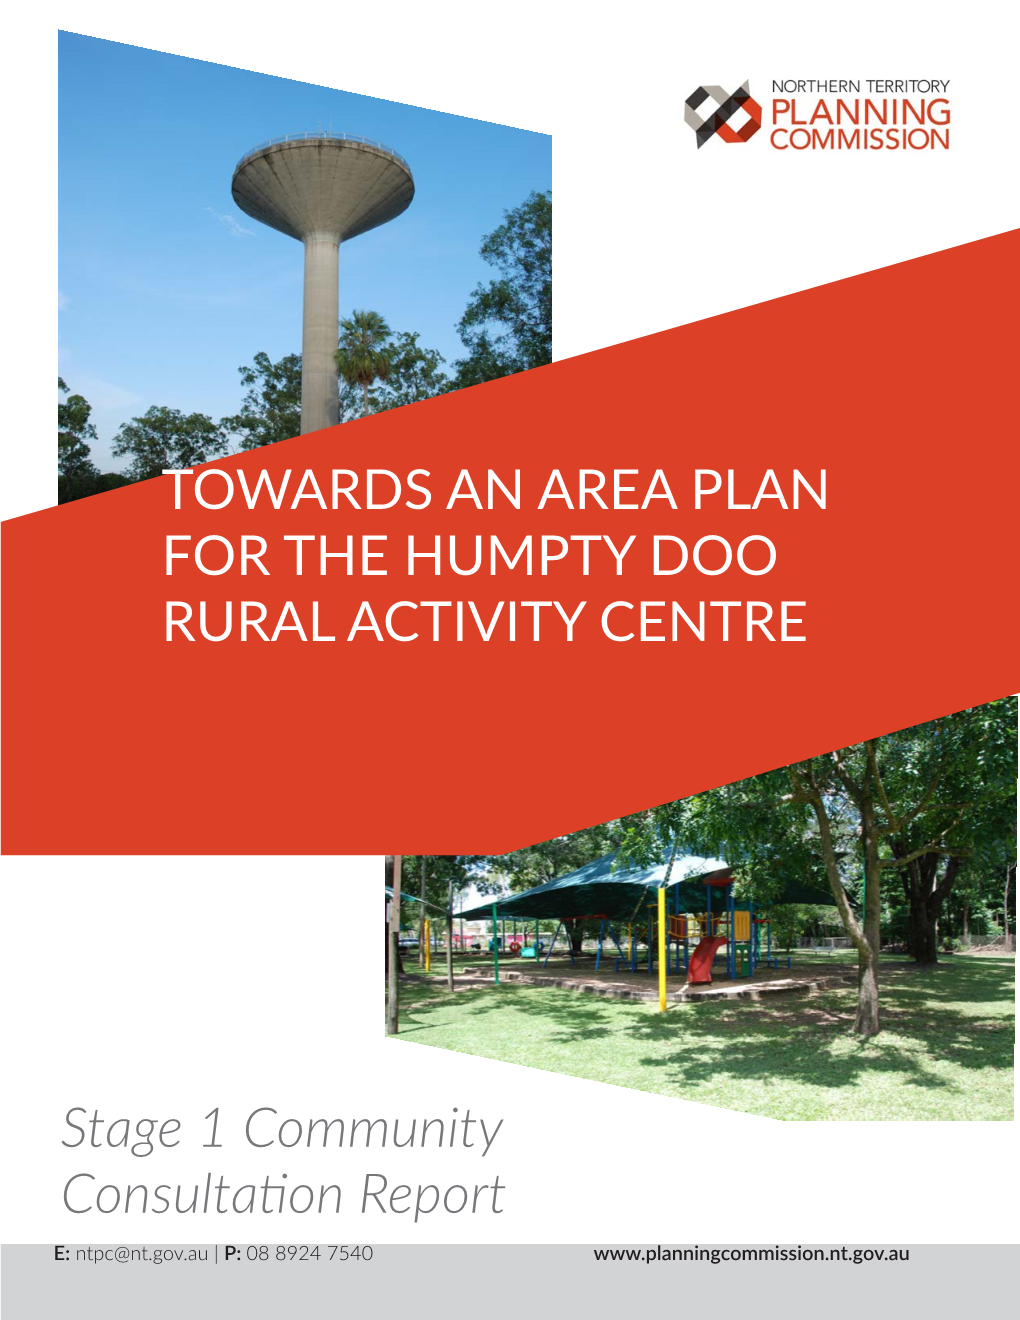 Towards an Area Plan for the Humpty Doo Rural Activity Centre